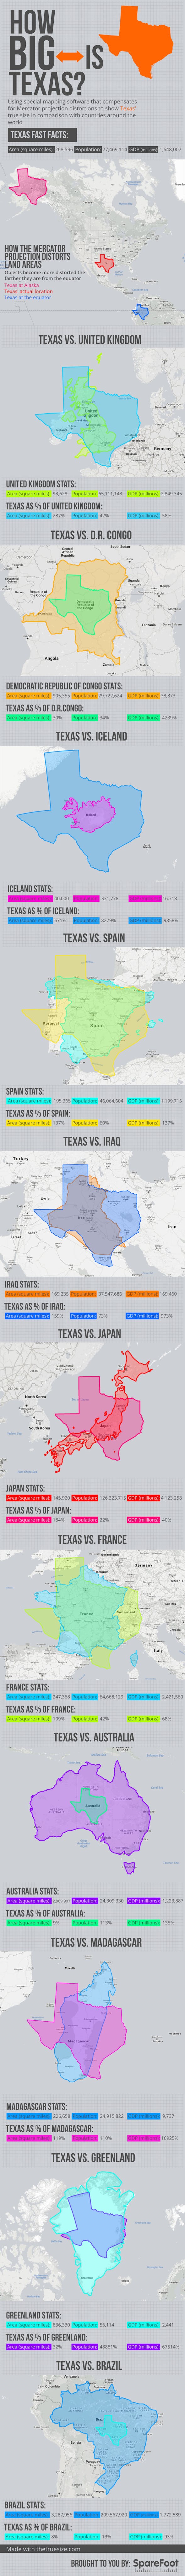 The size of Texas in comparison to other landmarks. 